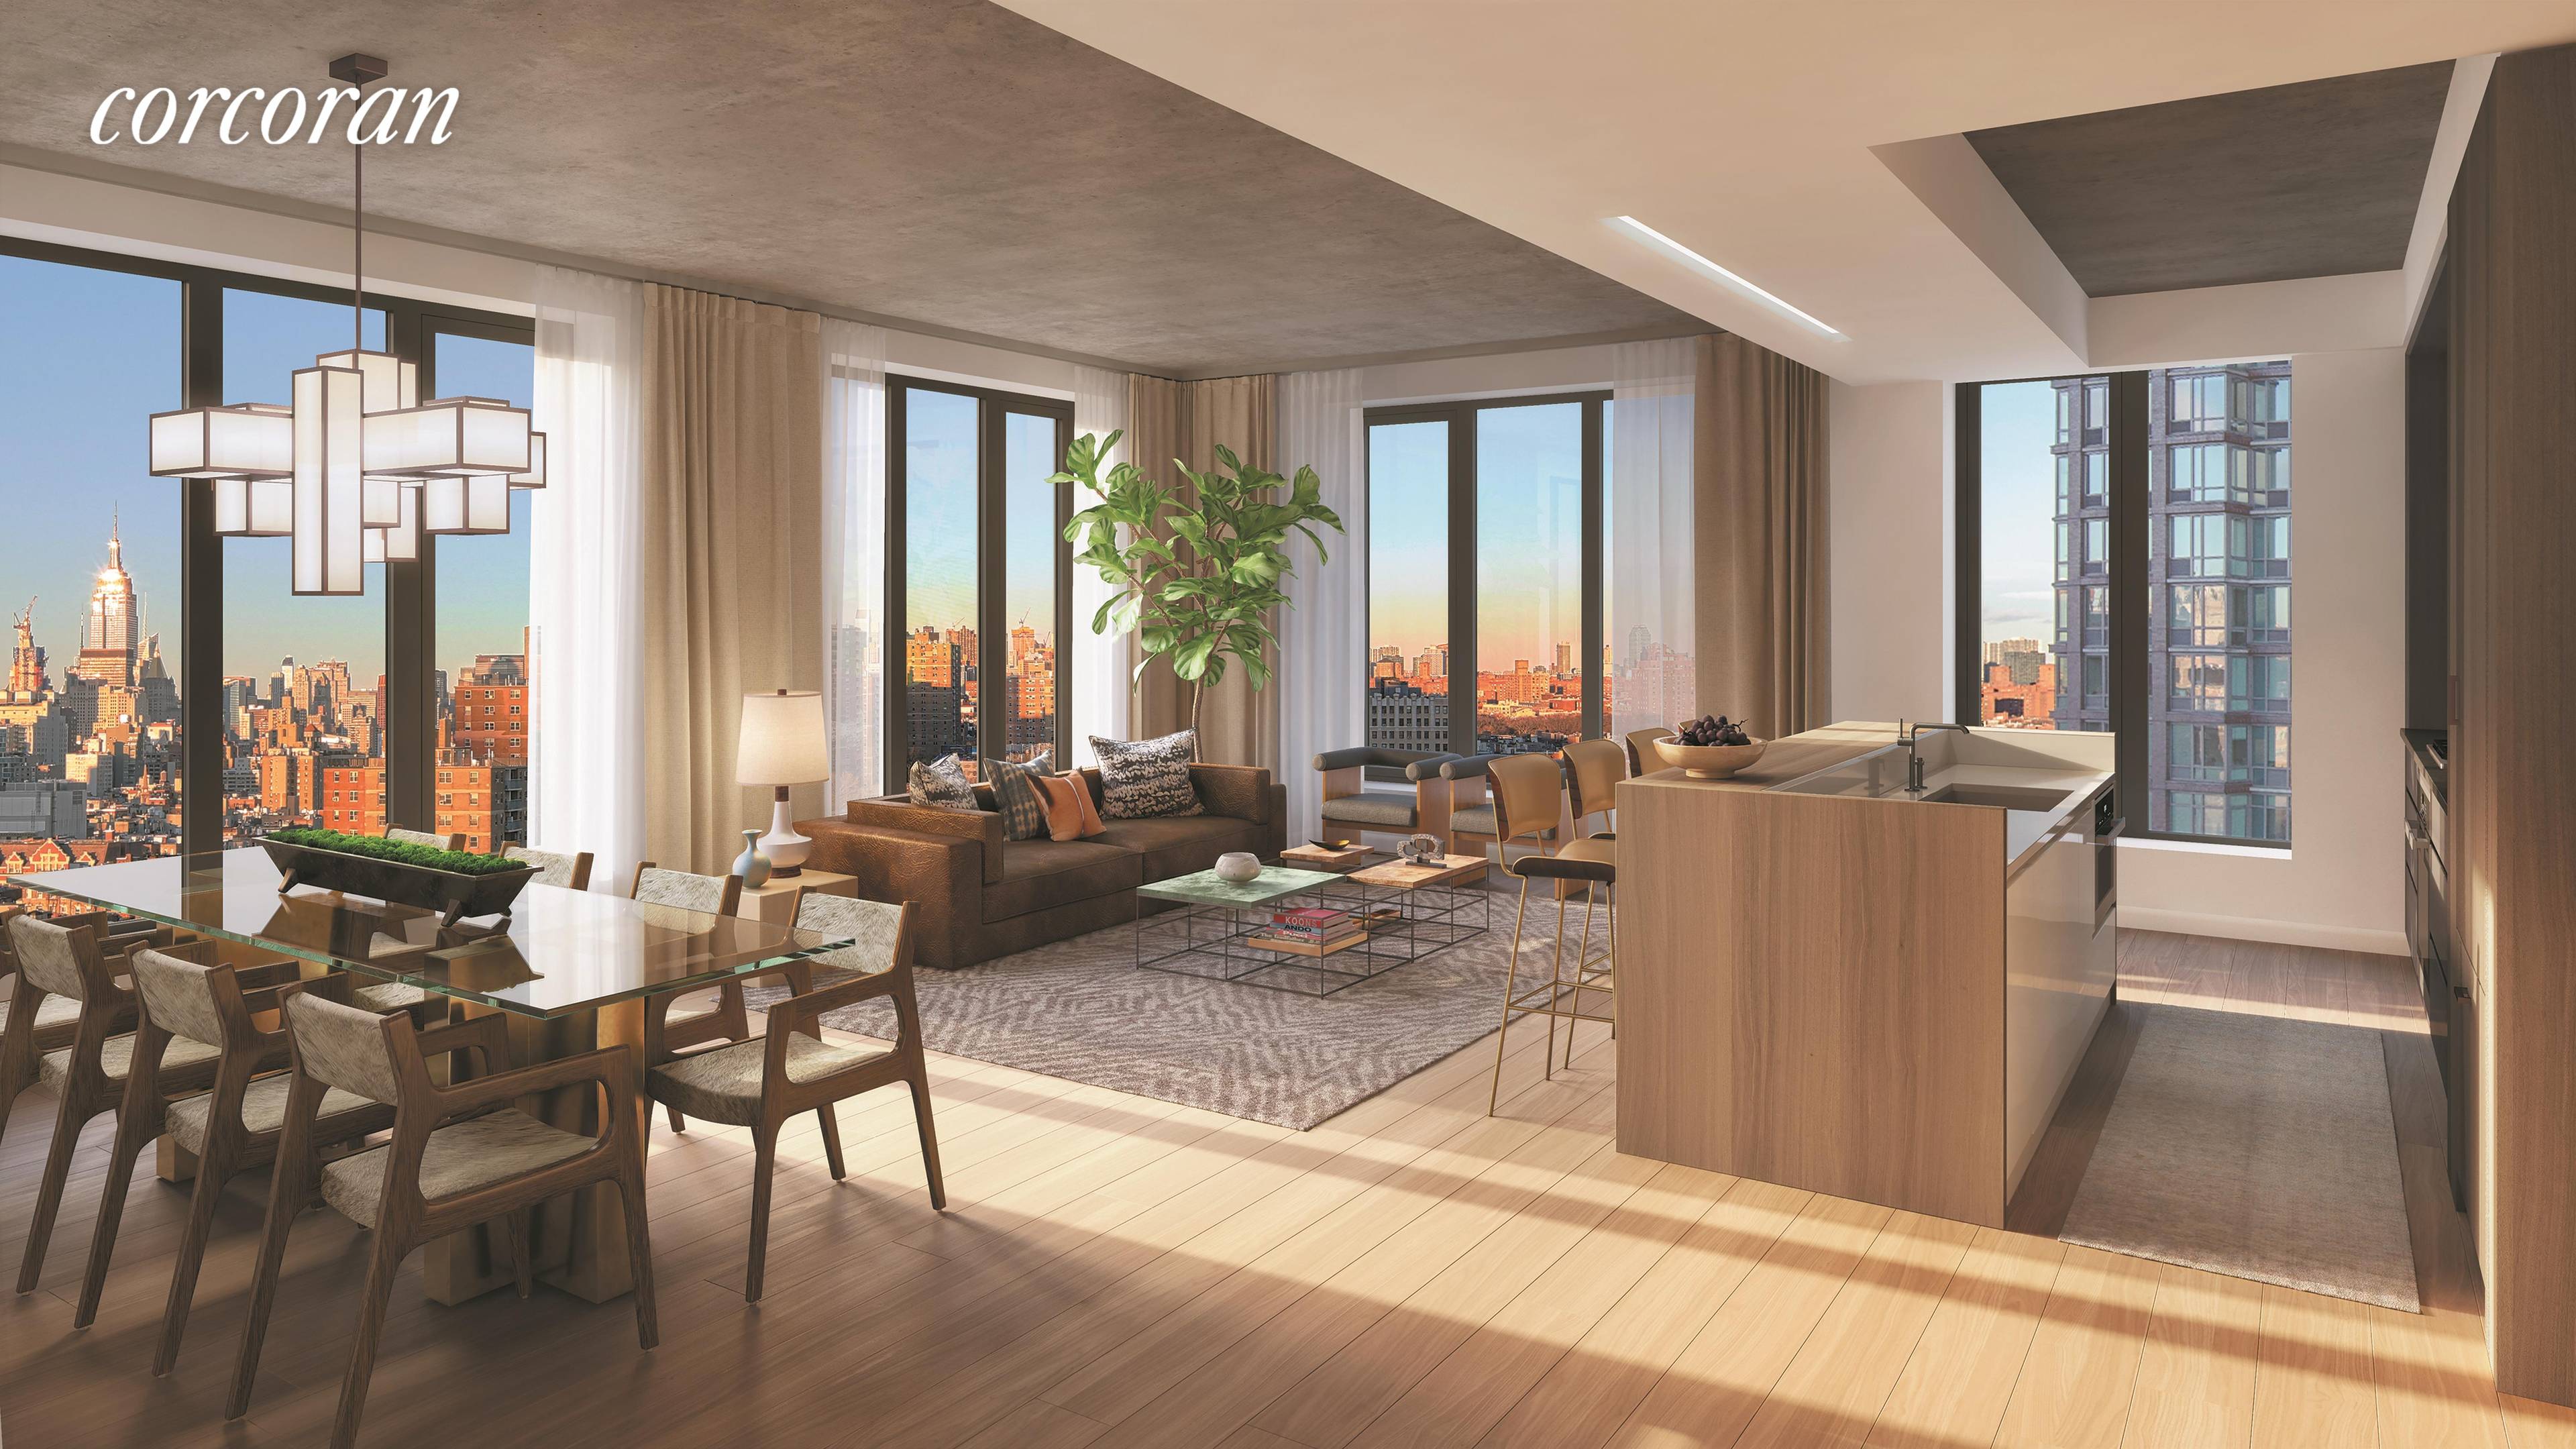 IMMEDIATE OCCUPANCY Residence 5K is a sunny, 753 square foot one bedroom with one full bath that faces west through oversized casement windows surrounded in bronze, spilling sunlight onto white ...